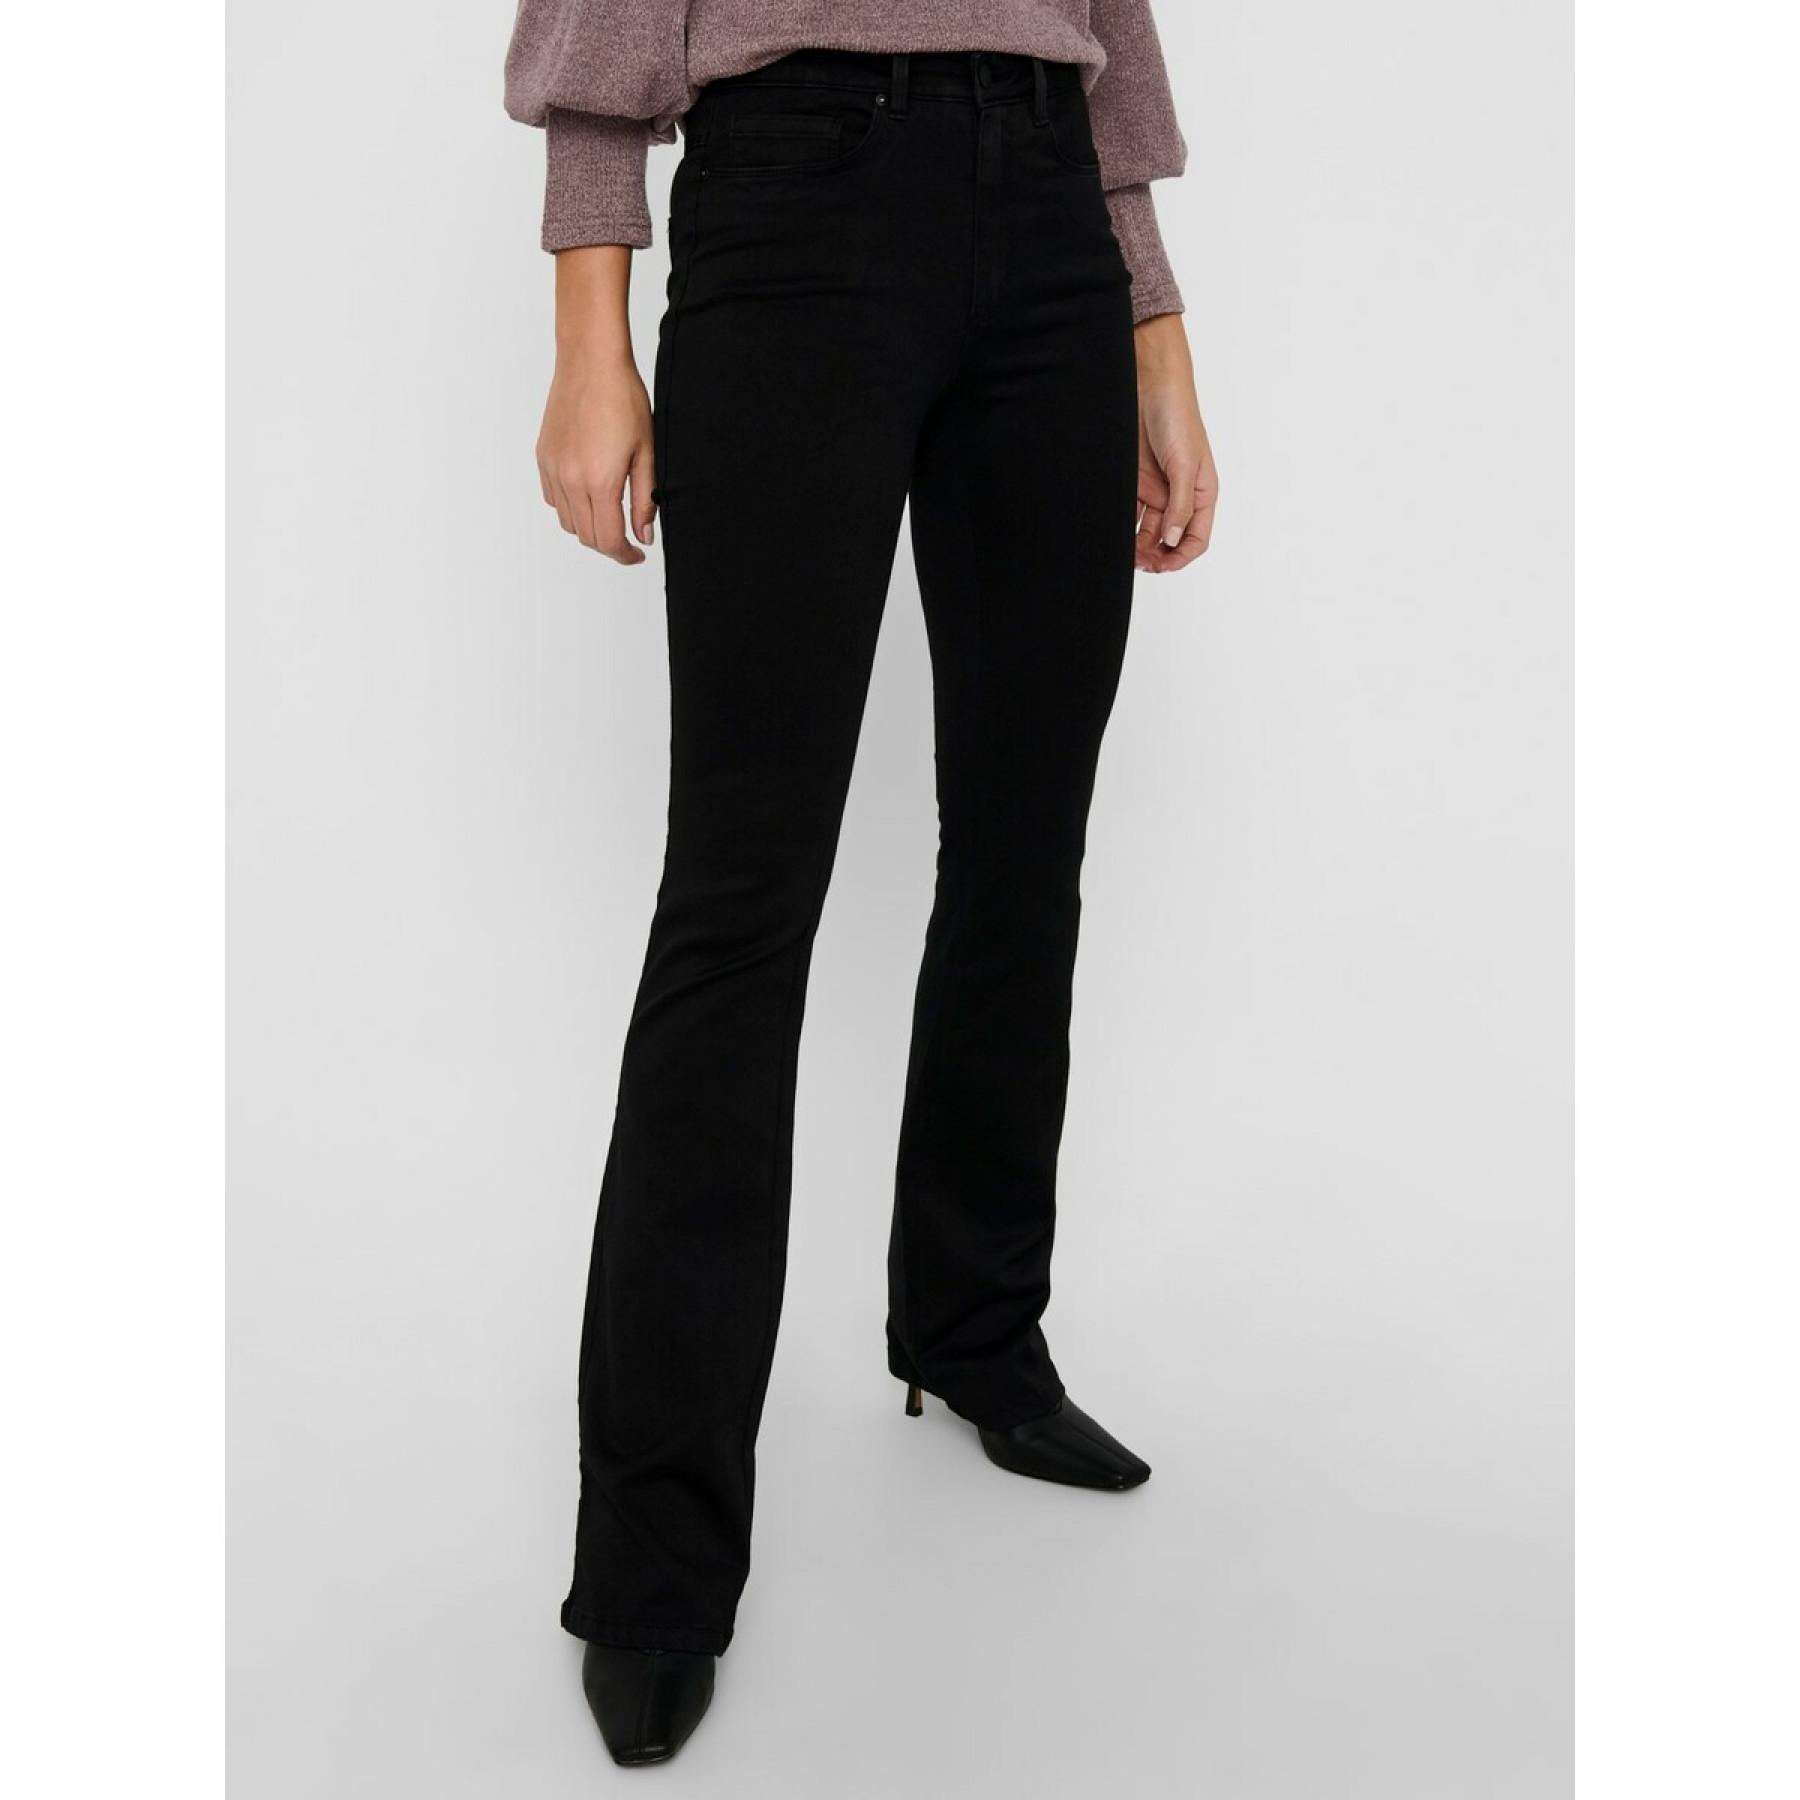 Women's trousers Only Royal life high sweet flare